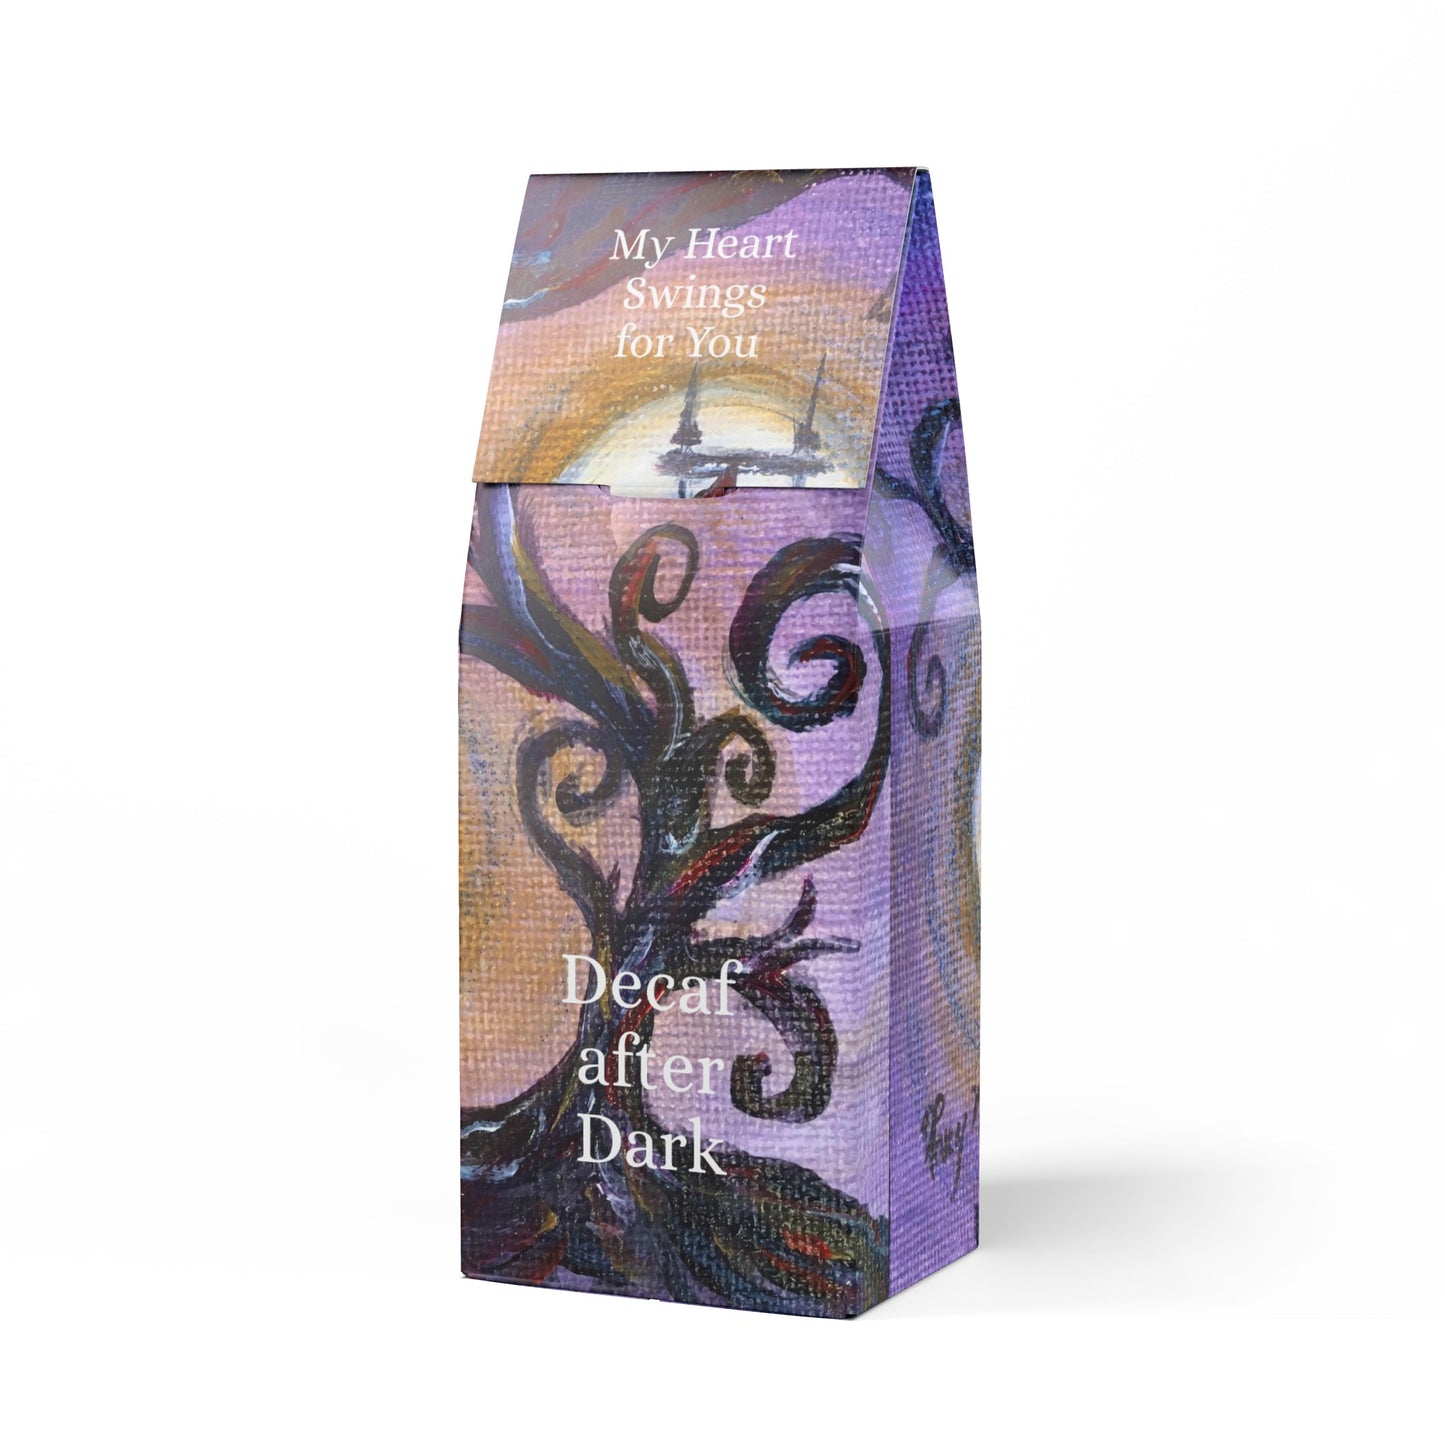 My Heart Swings for You-Decaf after Dark-Twilight Toast- Decaf Coffee Blend